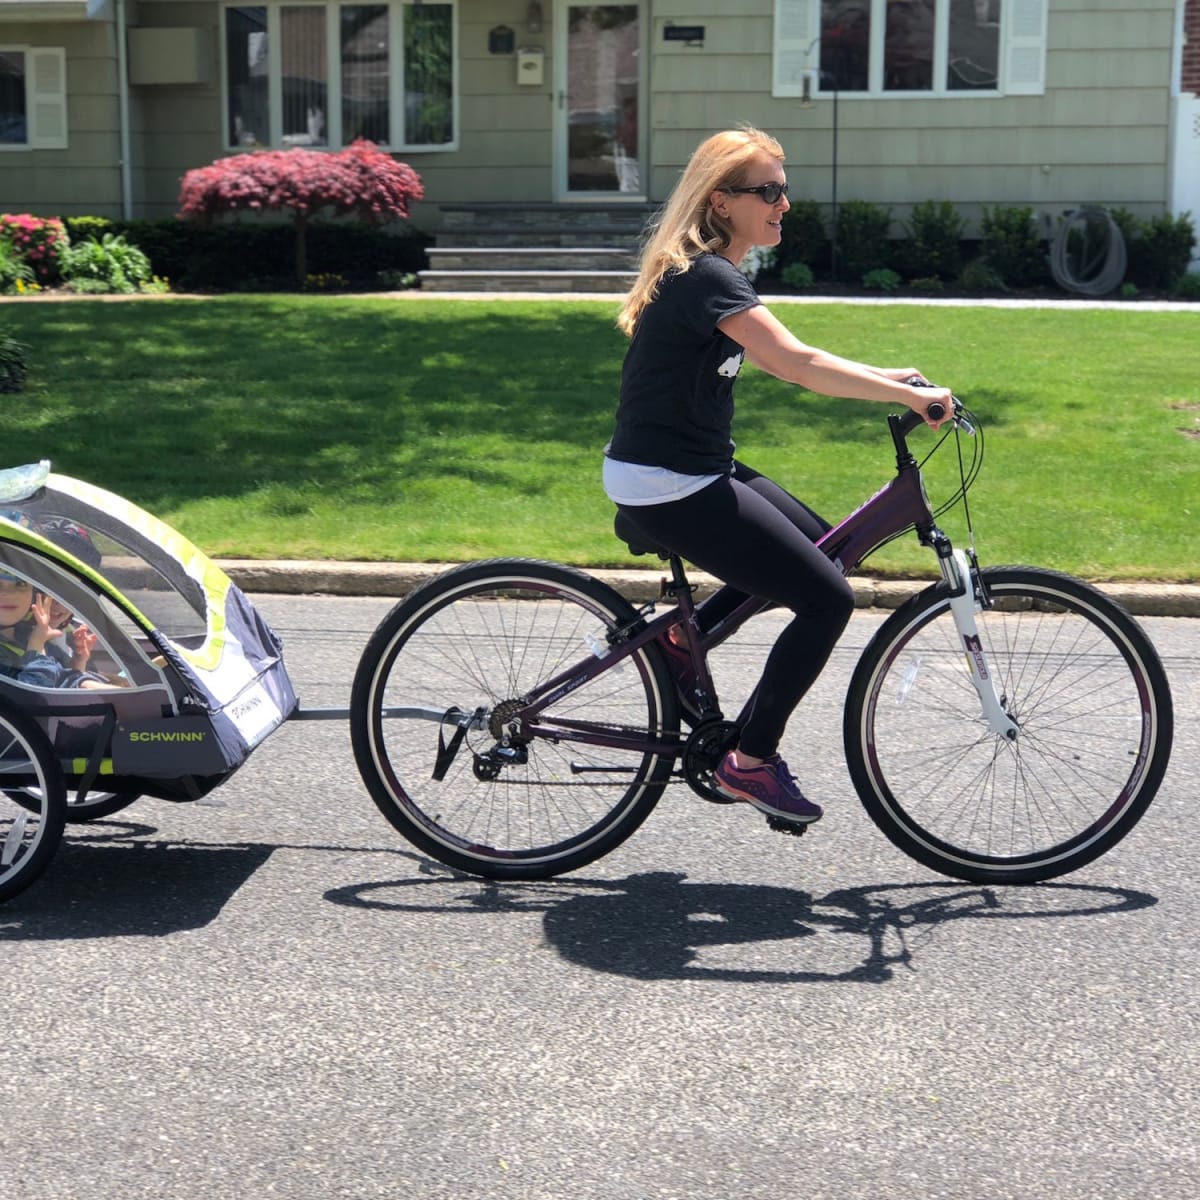 bicycle for mom and child